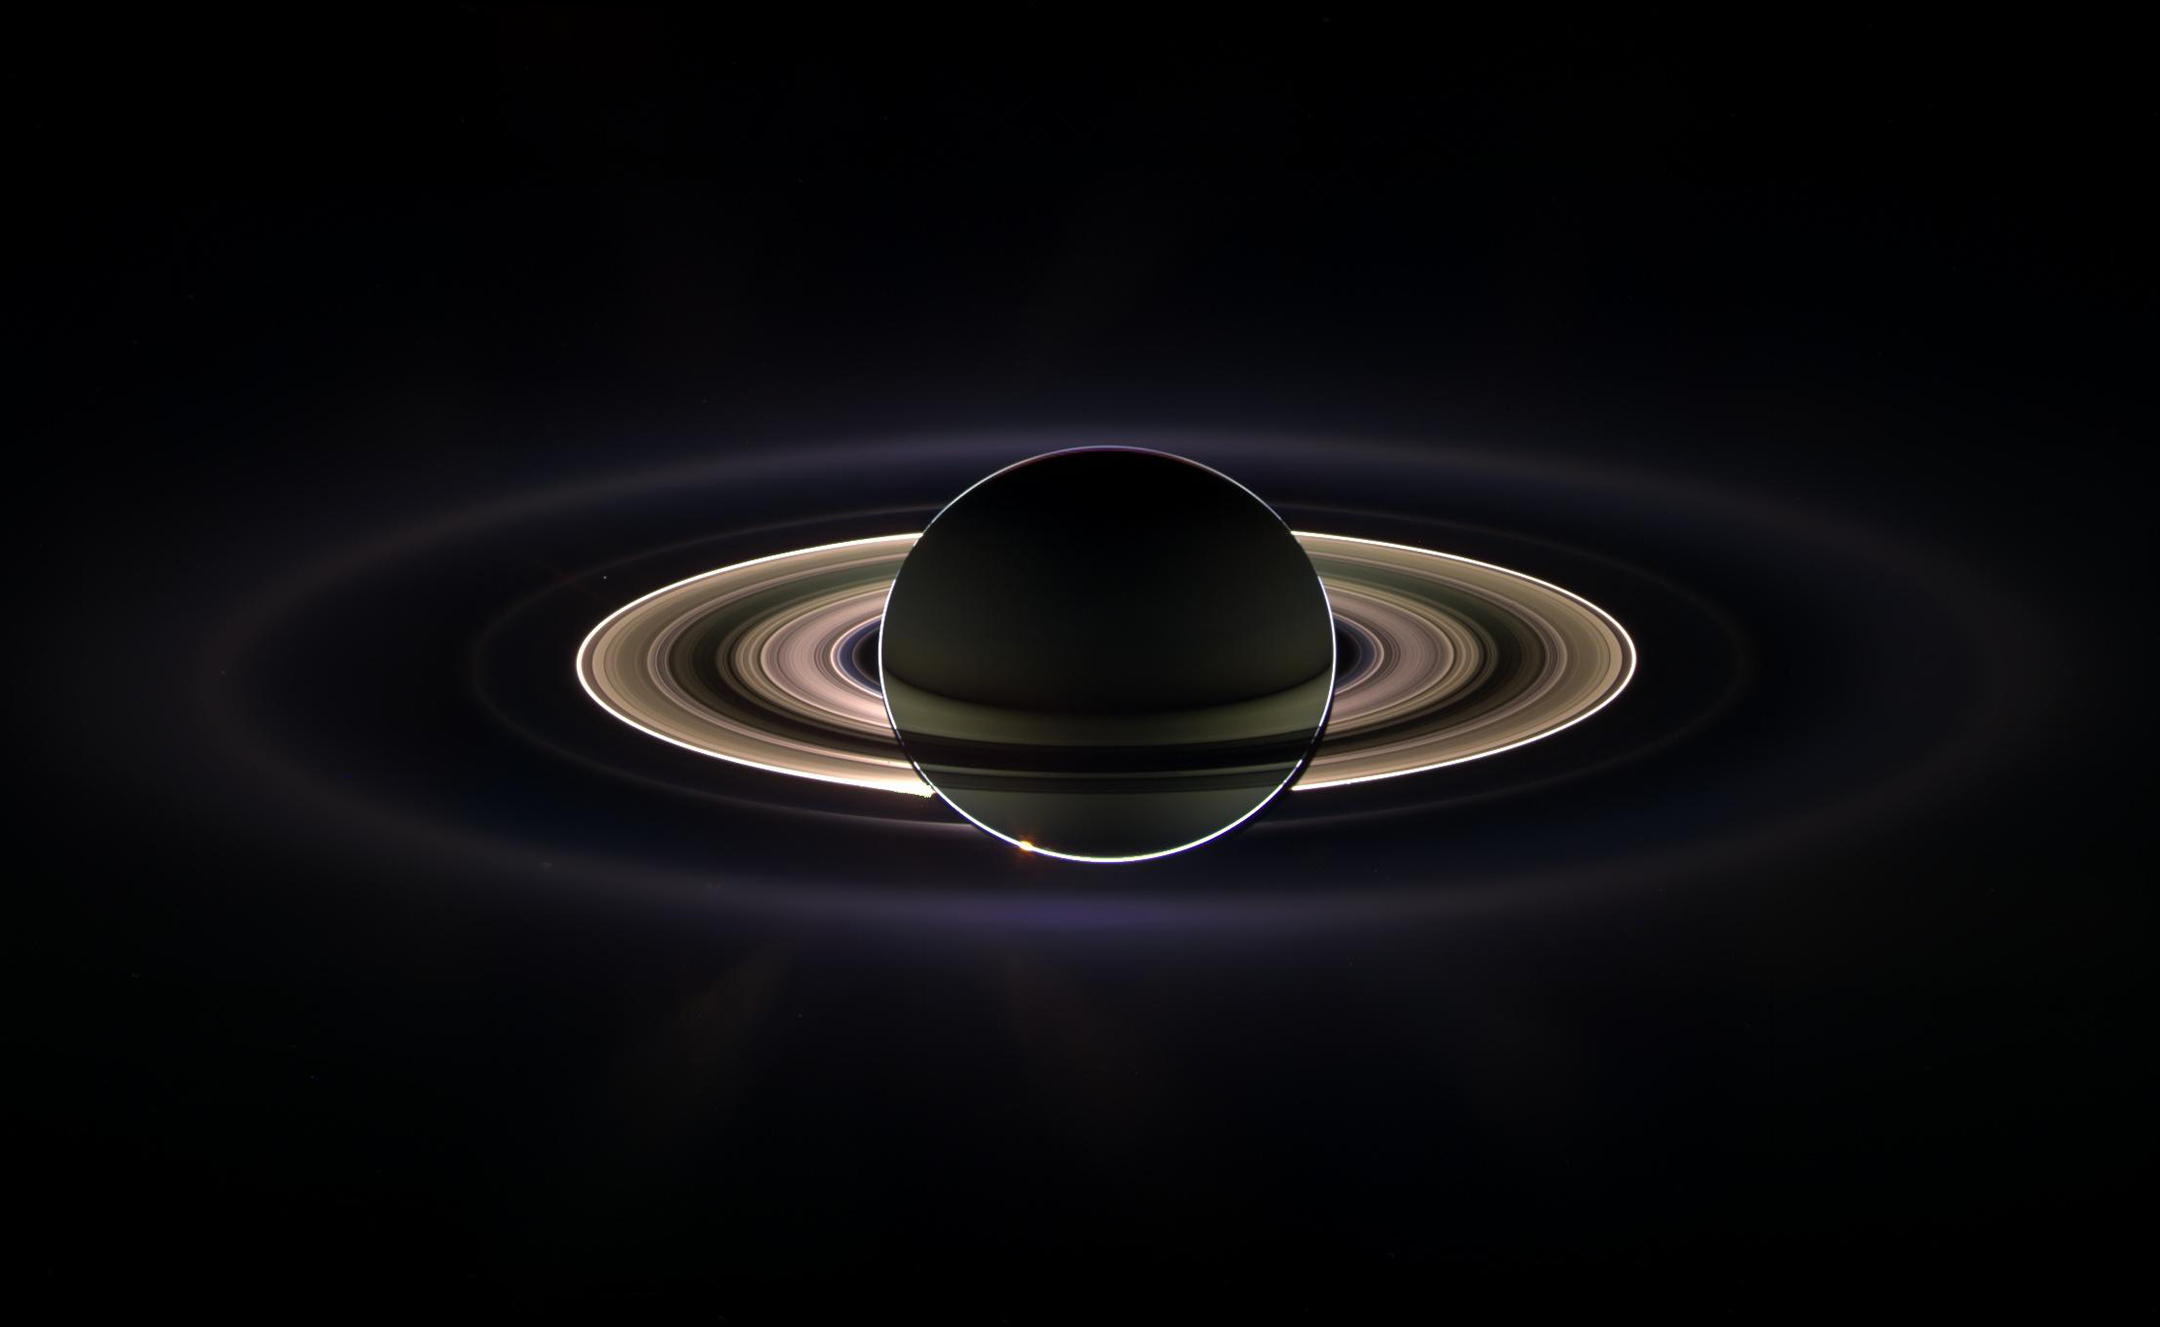 Image of Saturn and its rings in shadow and outlined against a black background